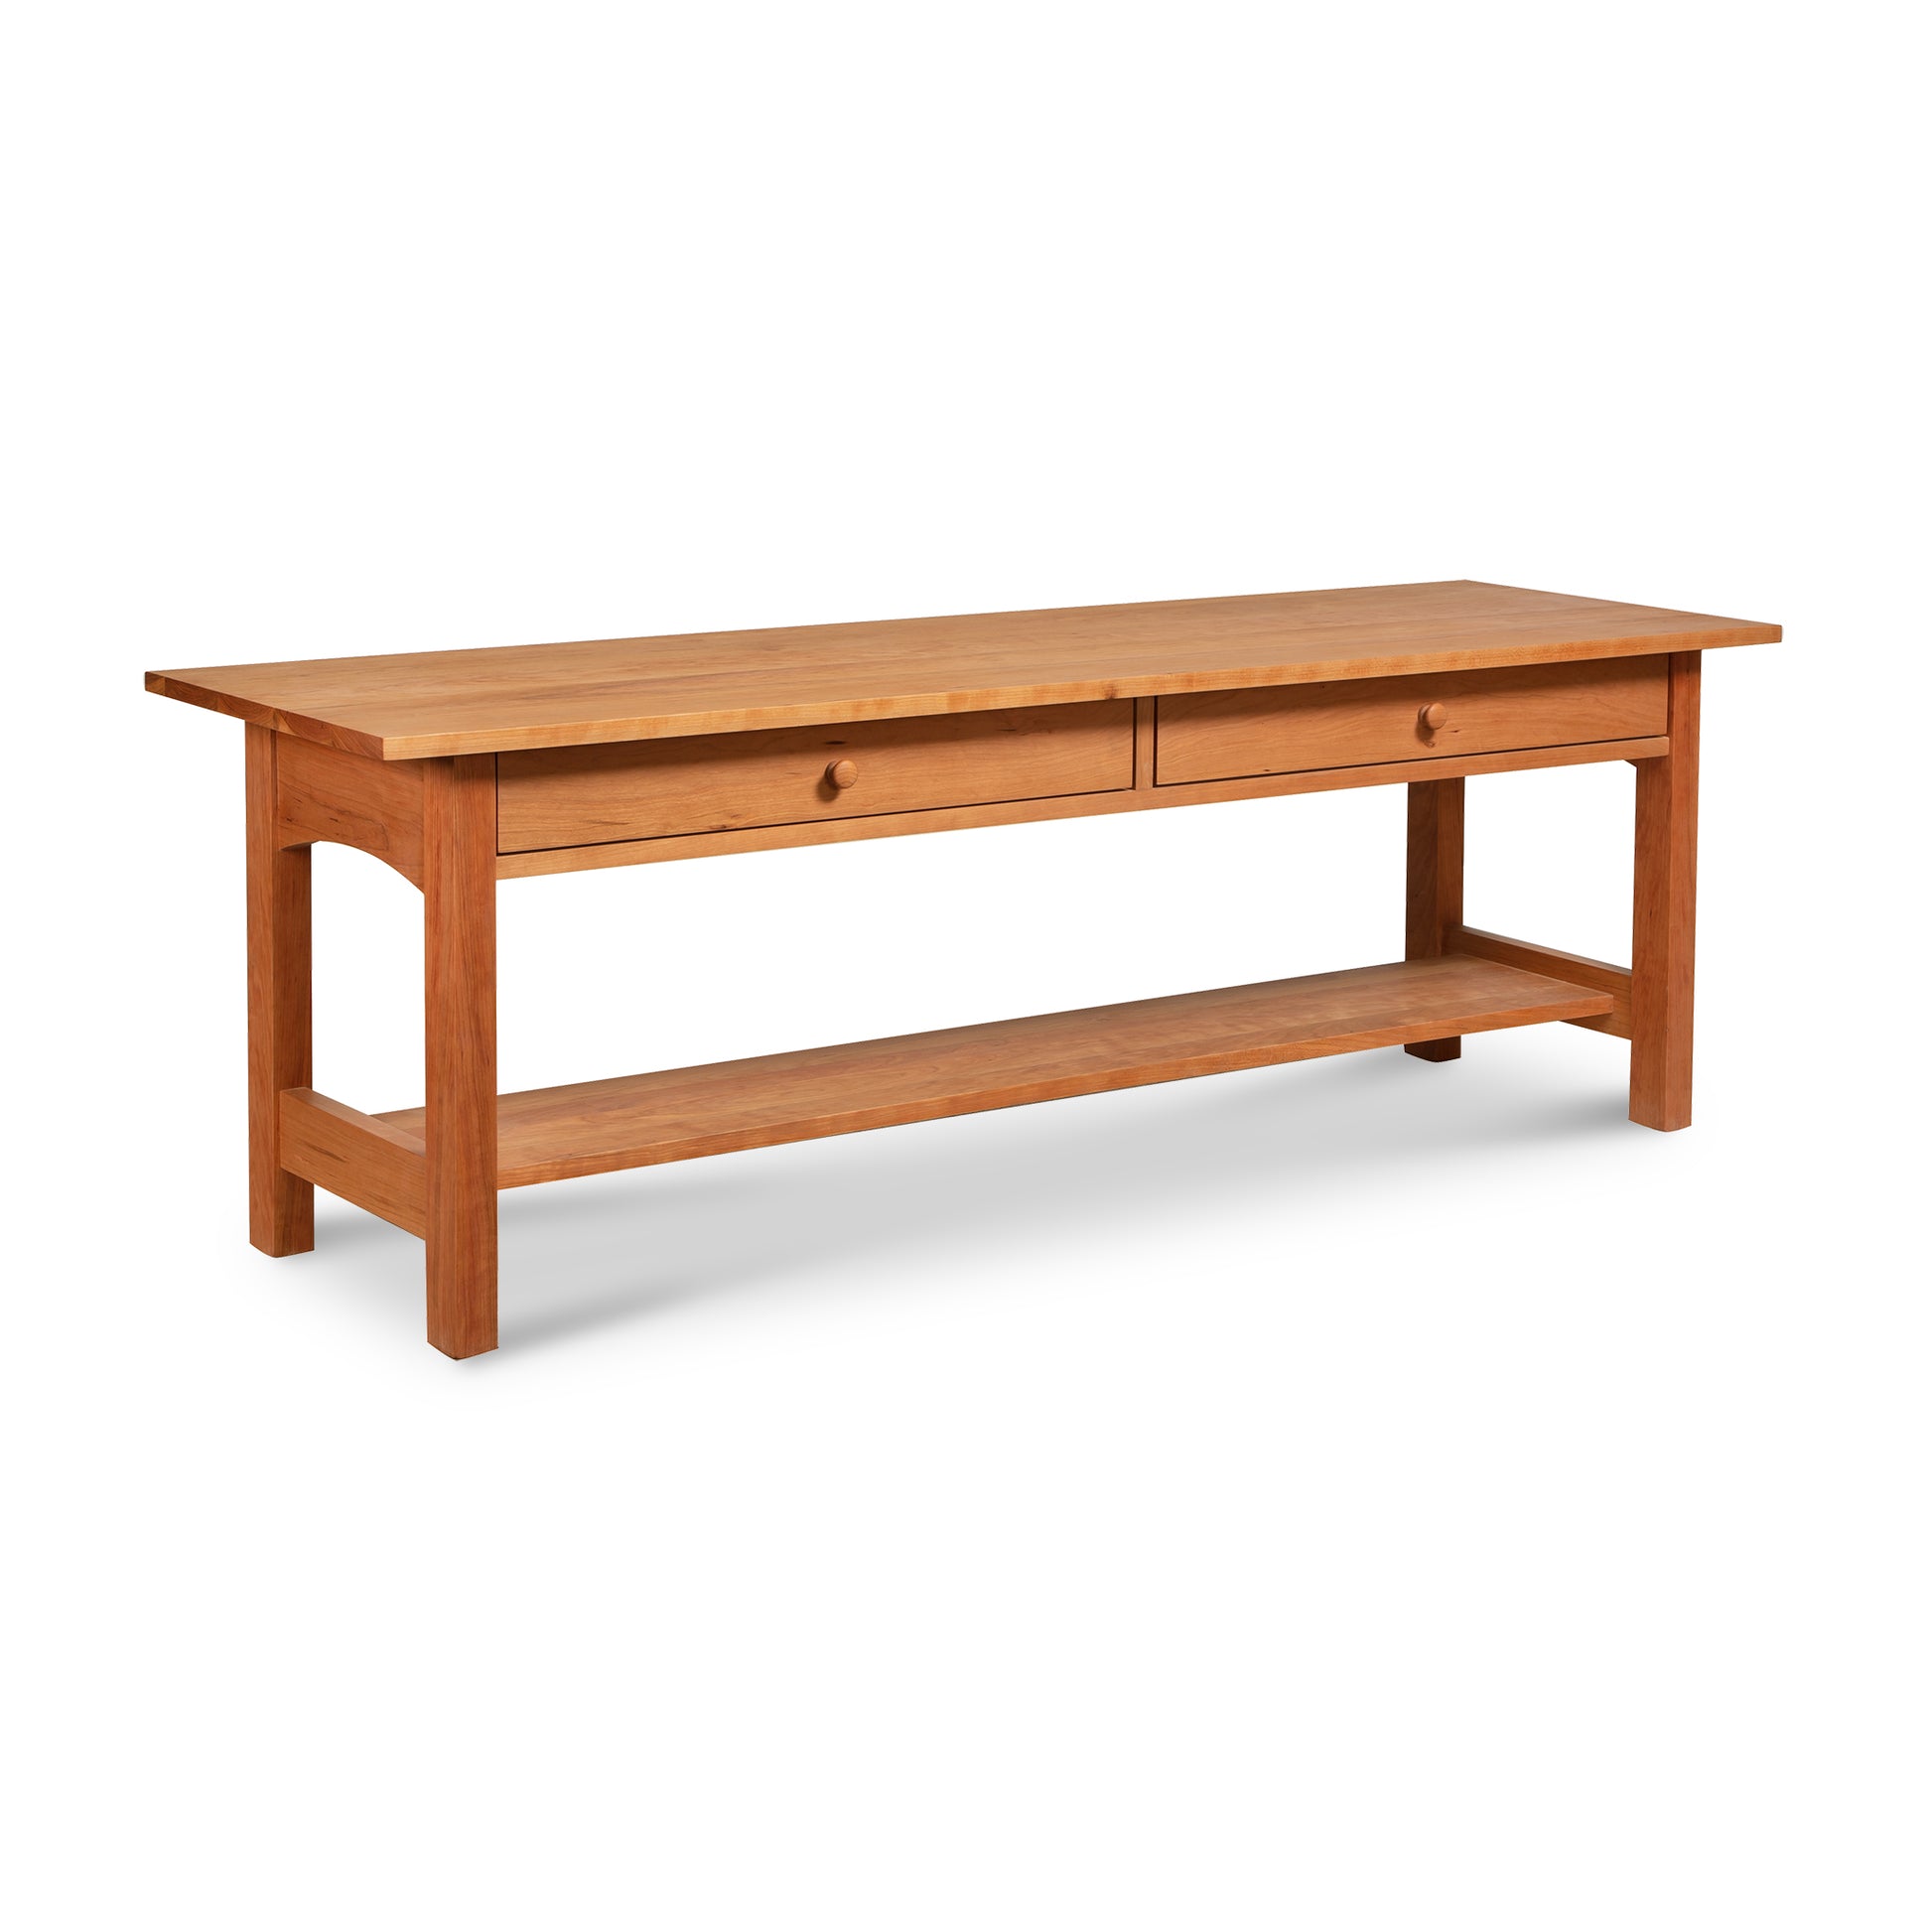 A Burlington Shaker 2-Drawer Coffee Table with two drawers from Vermont Furniture Designs.